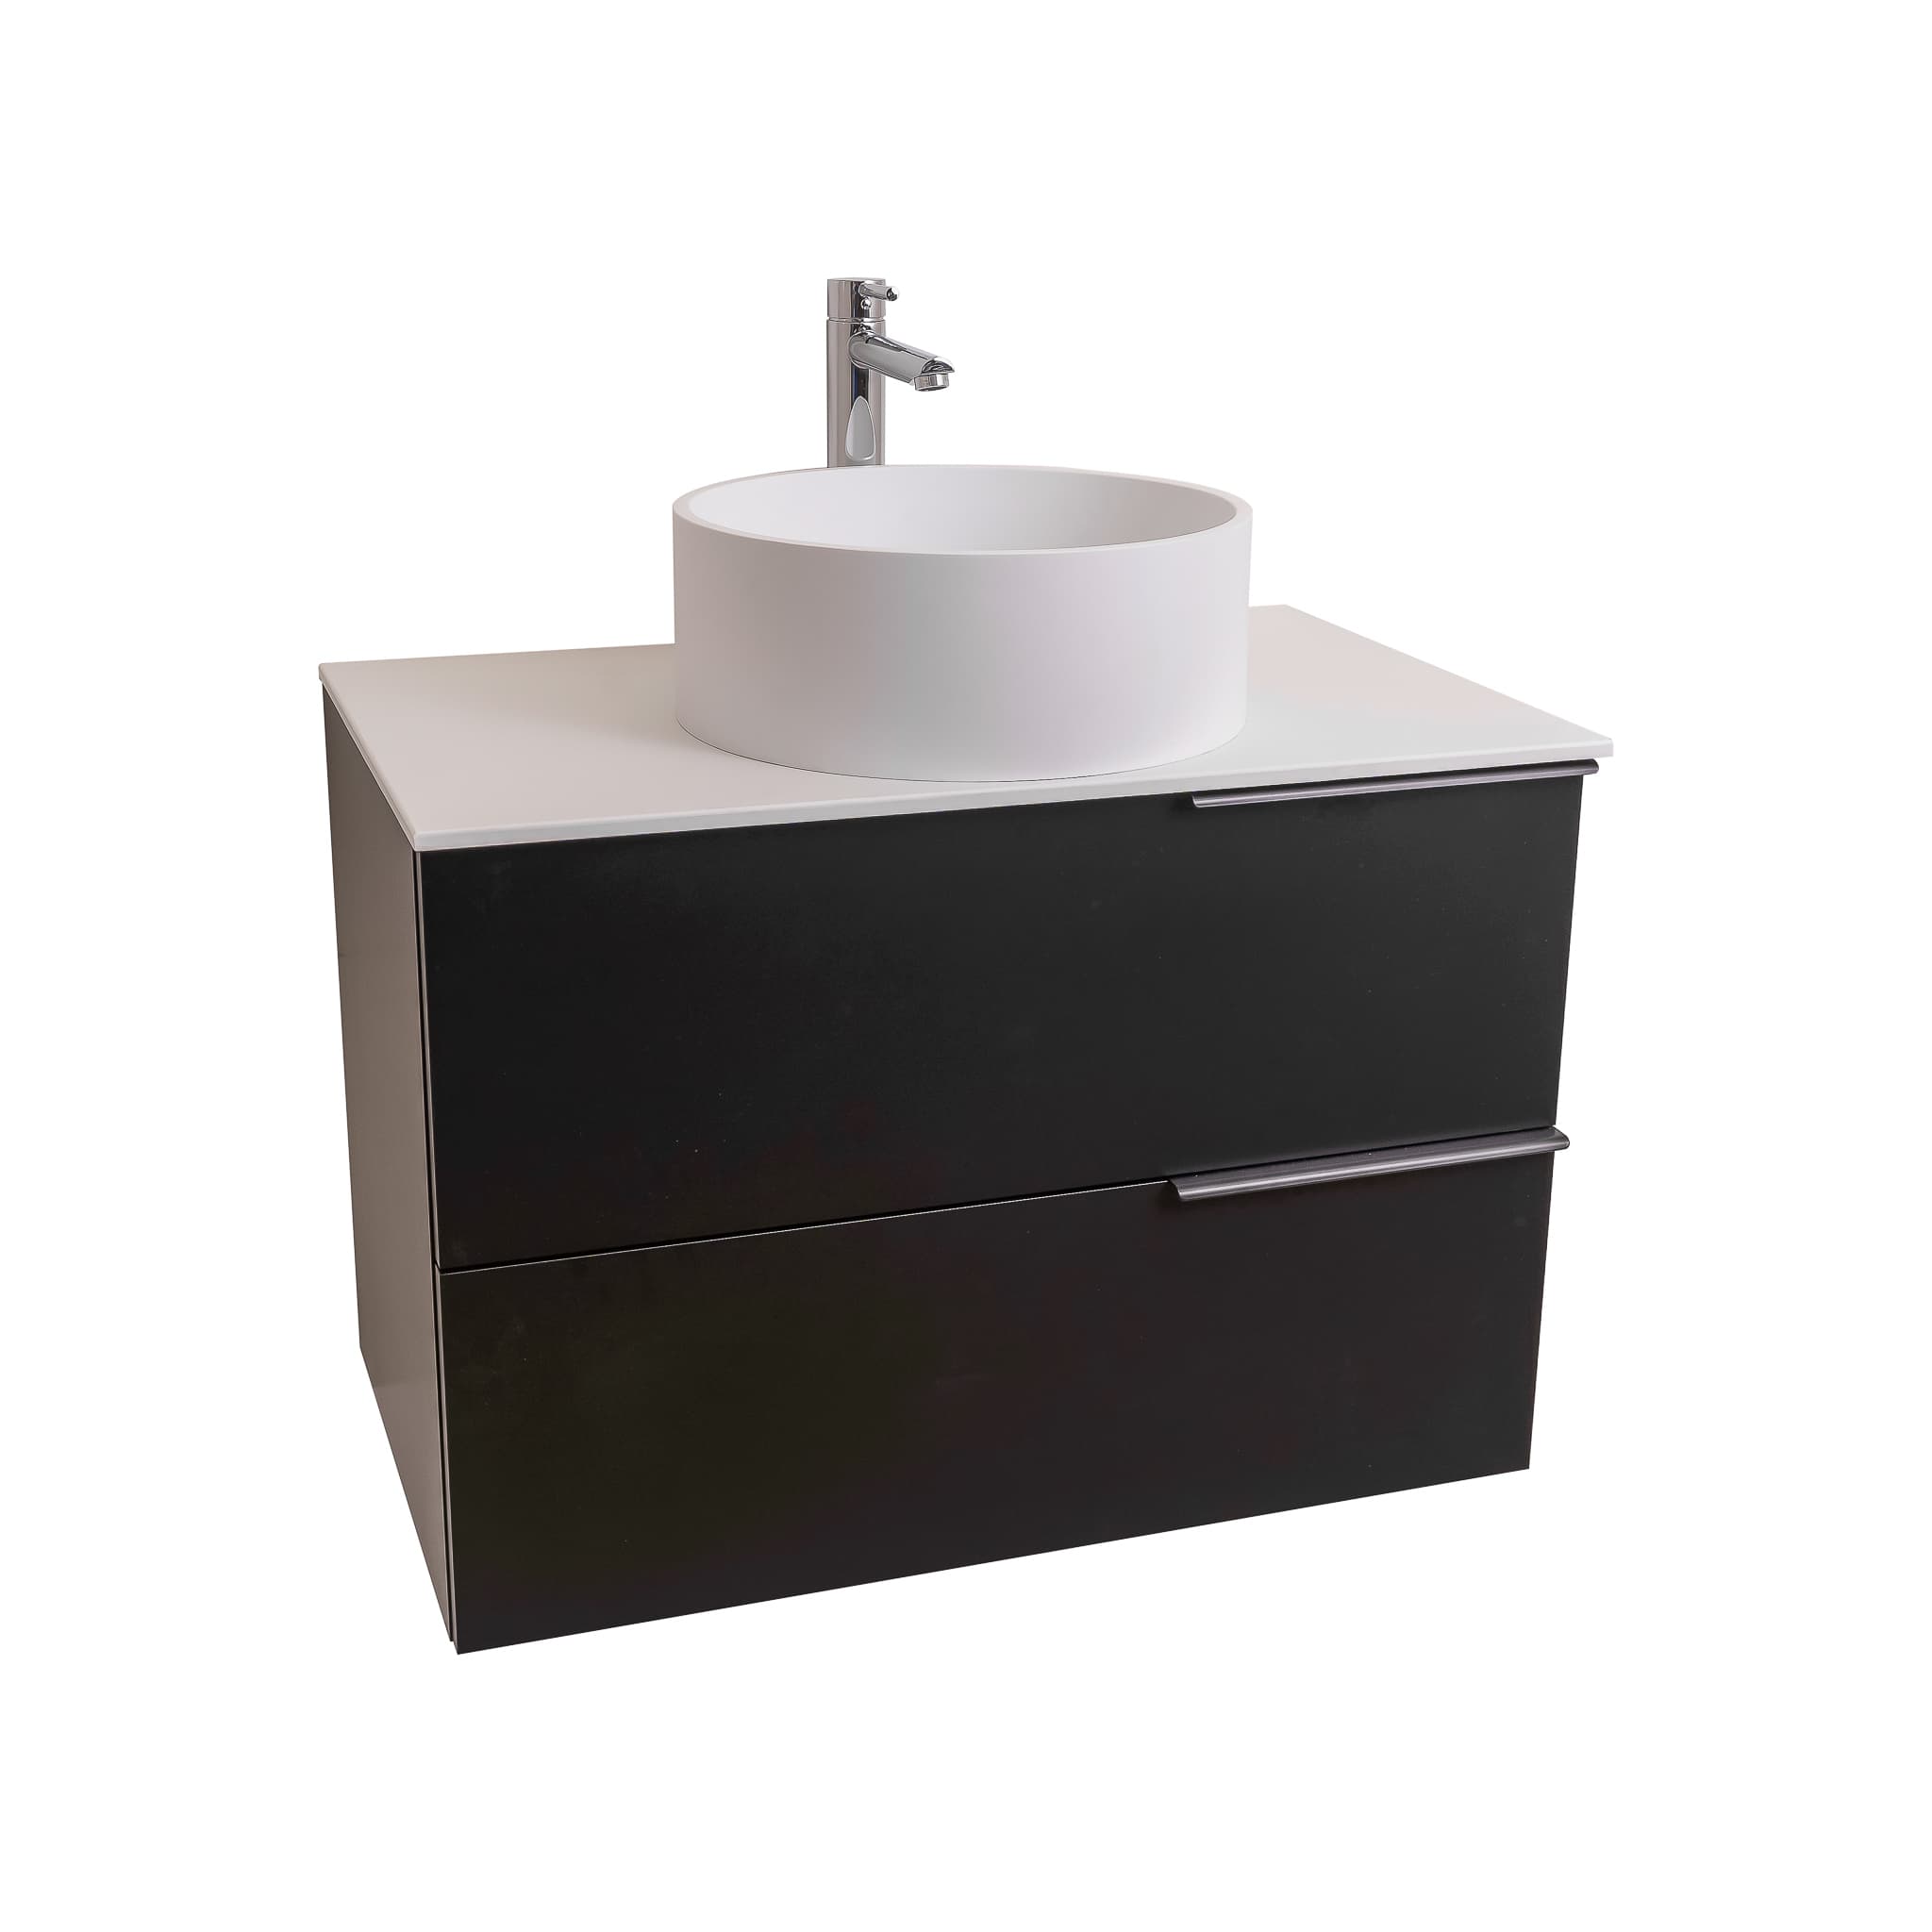 Mallorca 39.5 Matte Black Cabinet, Solid Surface Flat White Counter And Round Solid Surface White Basin 1386, Wall Mounted Modern Vanity Set